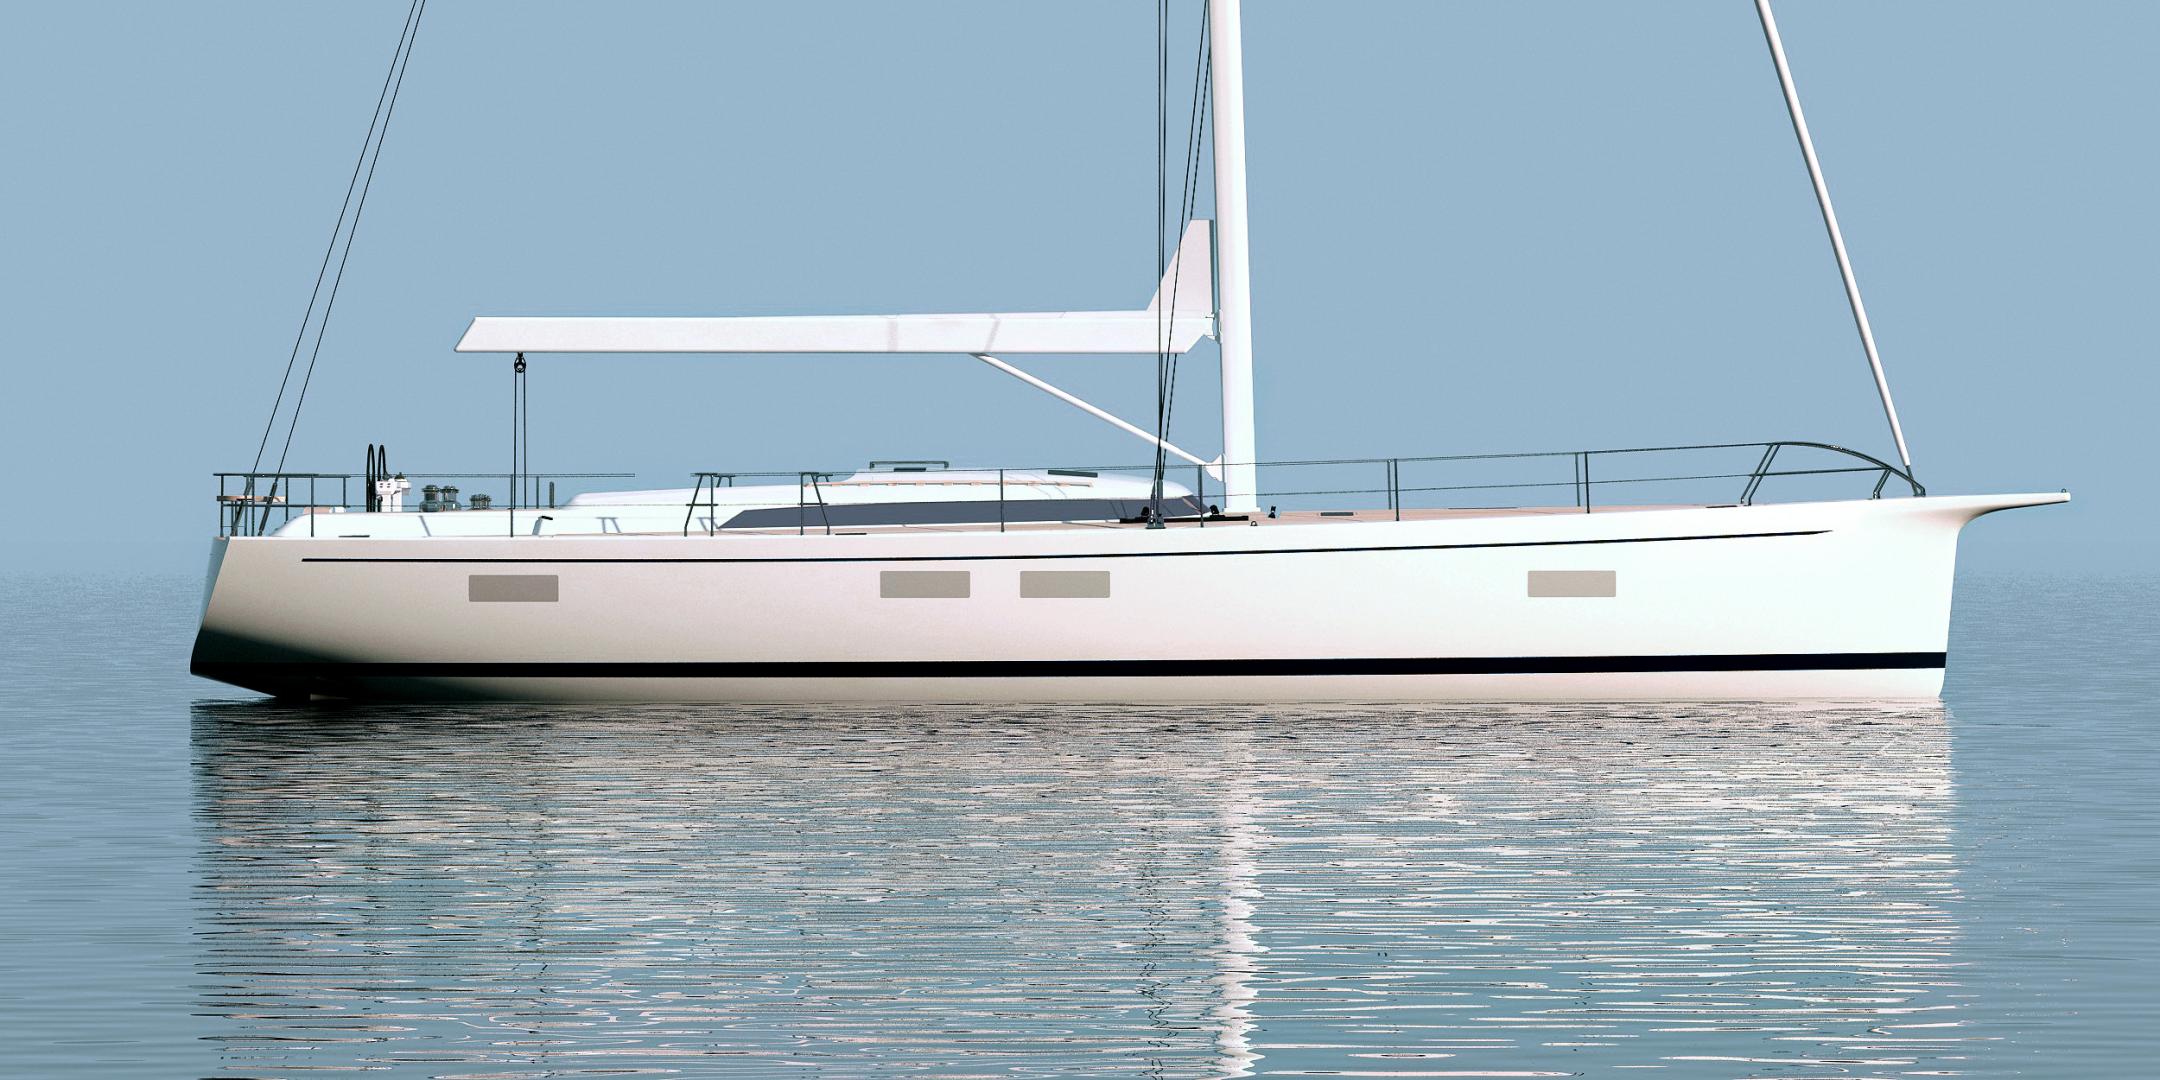 Hylas Yachts is proud to introduce the H60, designed for bluewater cruising